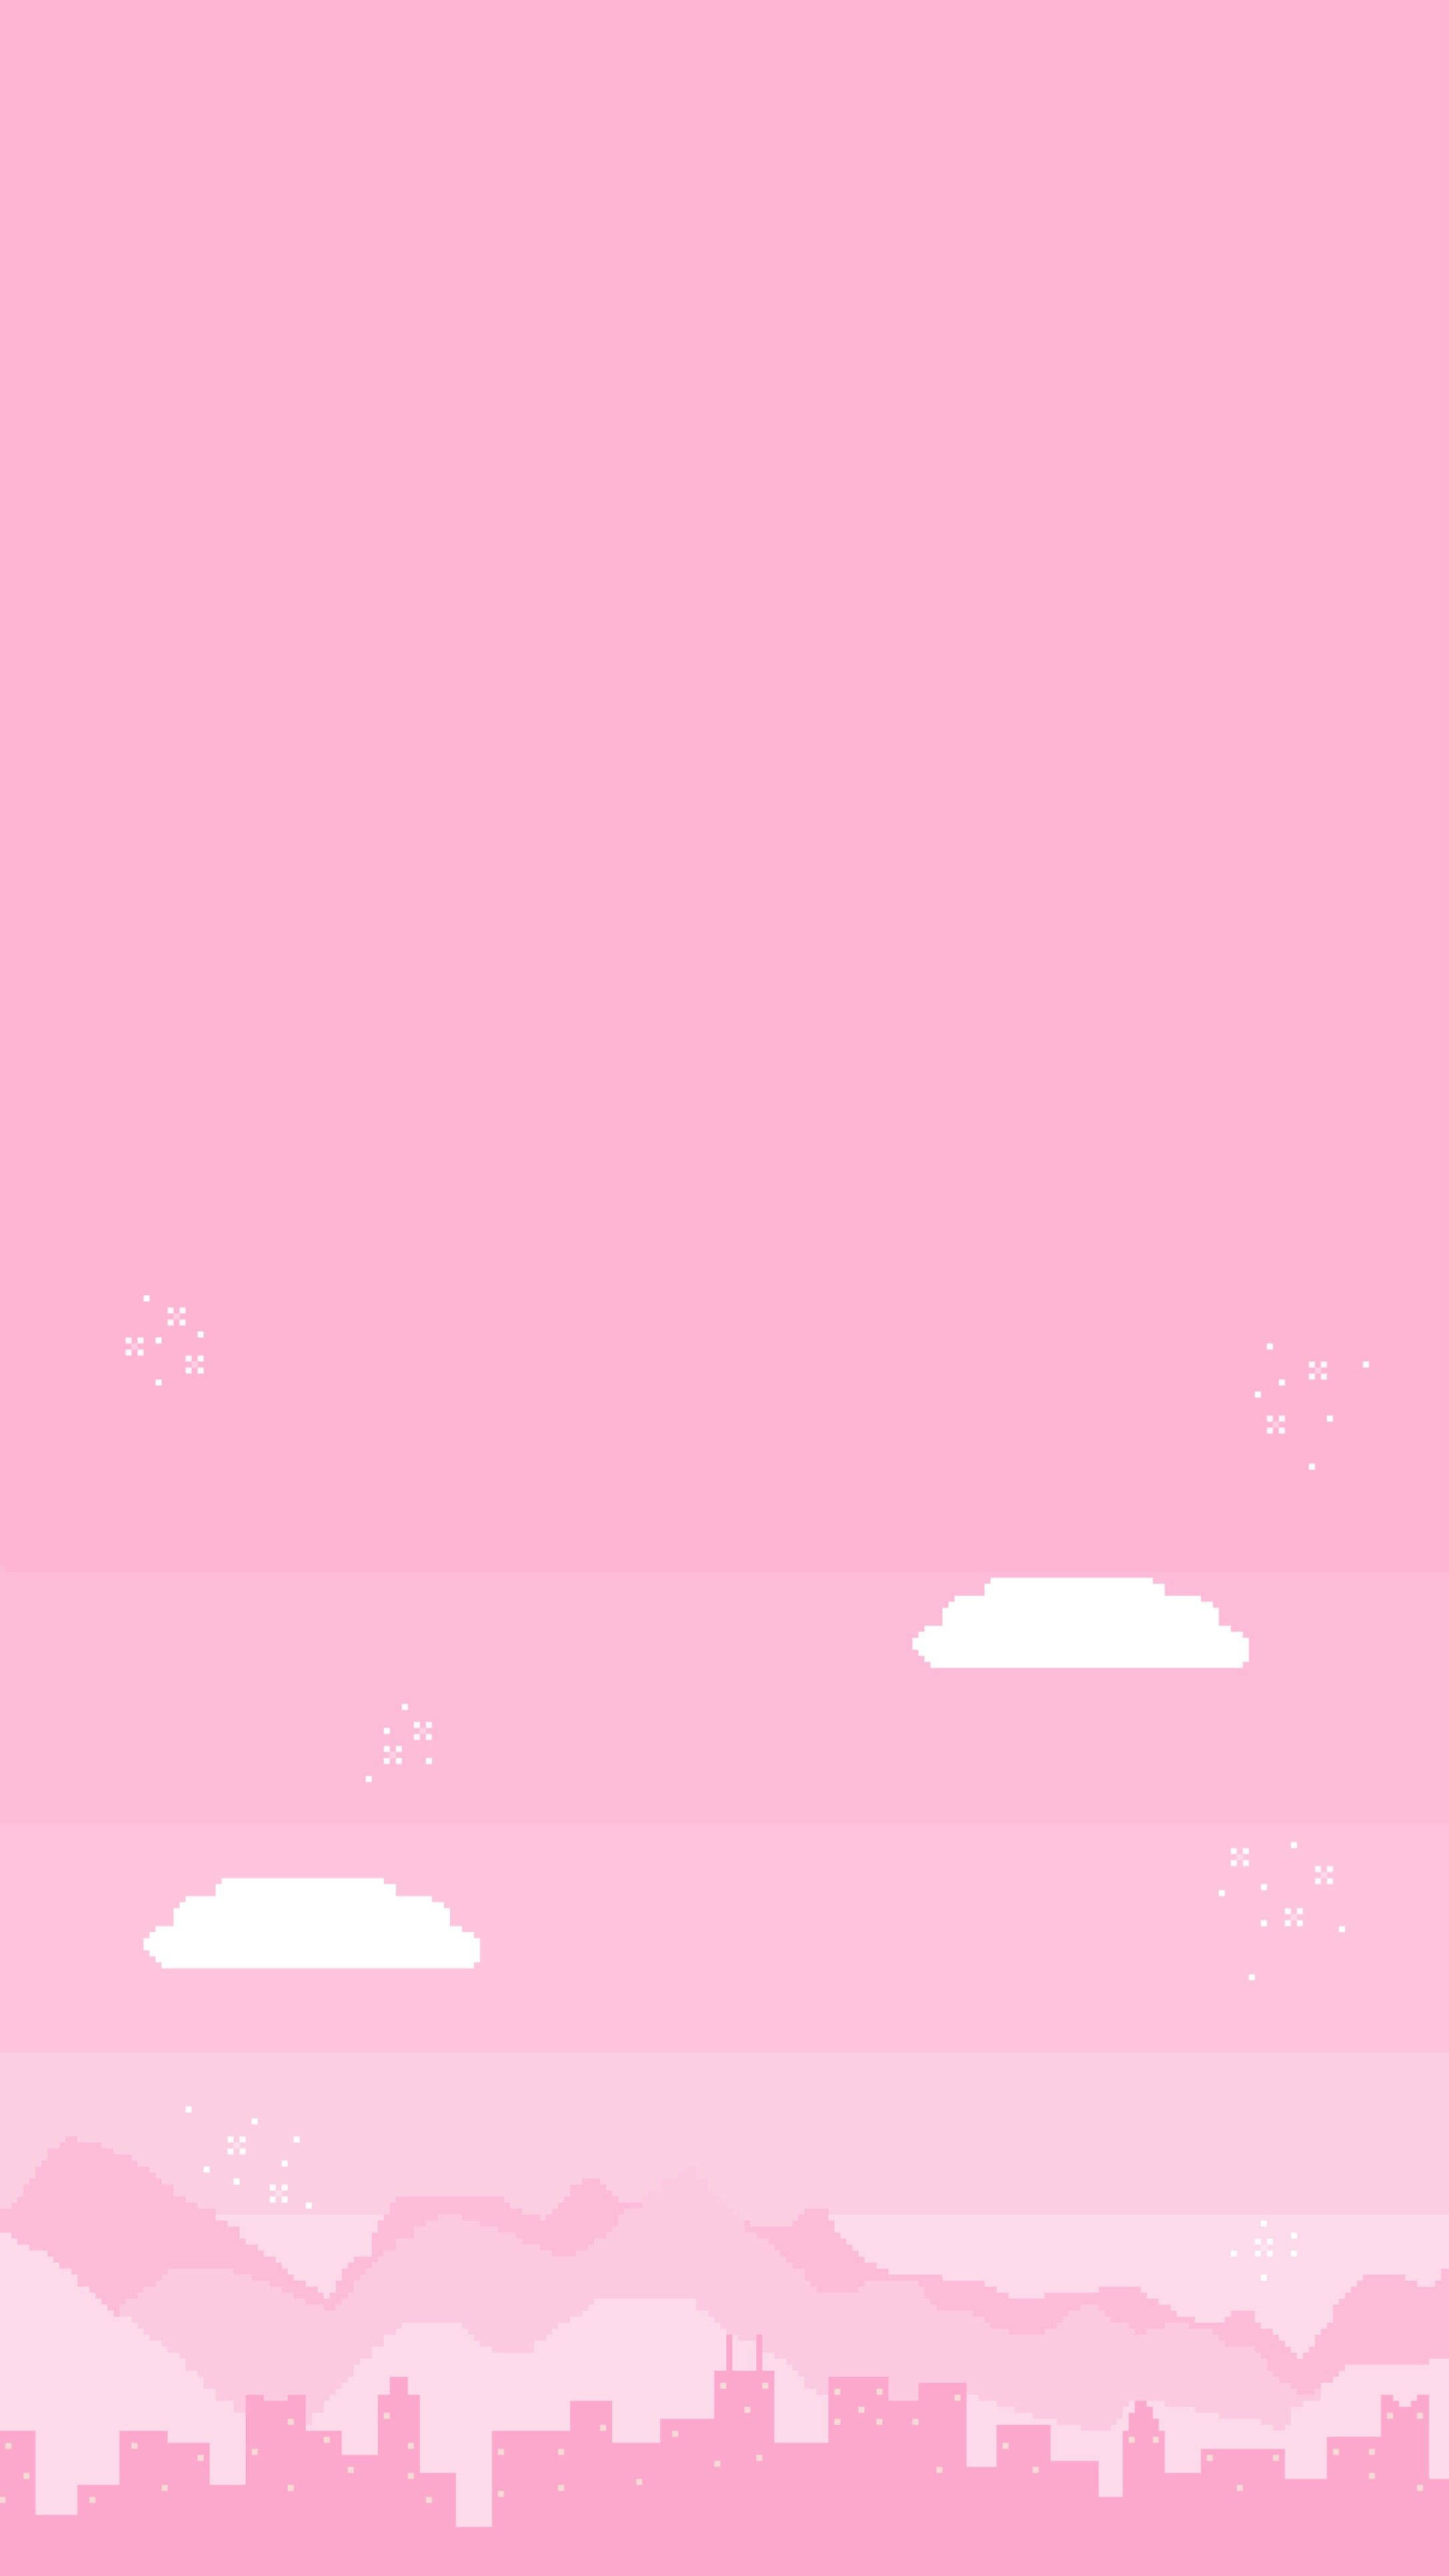 Cute Pink Aesthetic Mountains And Building Silhouettes Wallpaper